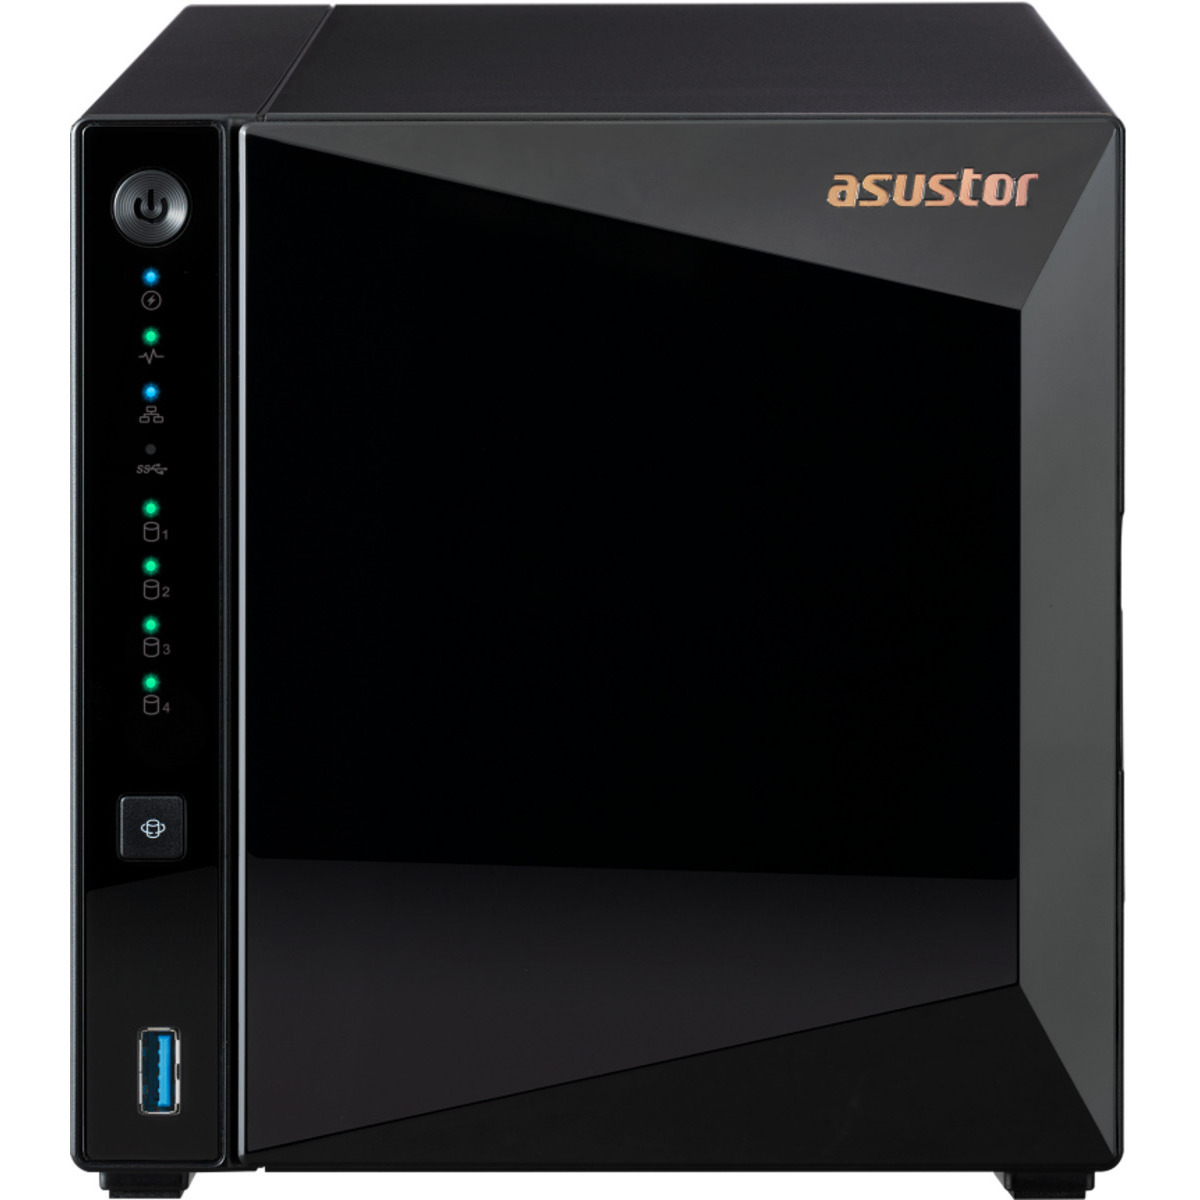 ASUSTOR DRIVESTOR 4 Pro Gen2 AS3304T v2 64tb 4-Bay Desktop Personal / Basic Home / Small Office NAS - Network Attached Storage Device 4x16tb Seagate EXOS X18 ST16000NM000J 3.5 7200rpm SATA 6Gb/s HDD ENTERPRISE Class Drives Installed - Burn-In Tested - ON SALE DRIVESTOR 4 Pro Gen2 AS3304T v2